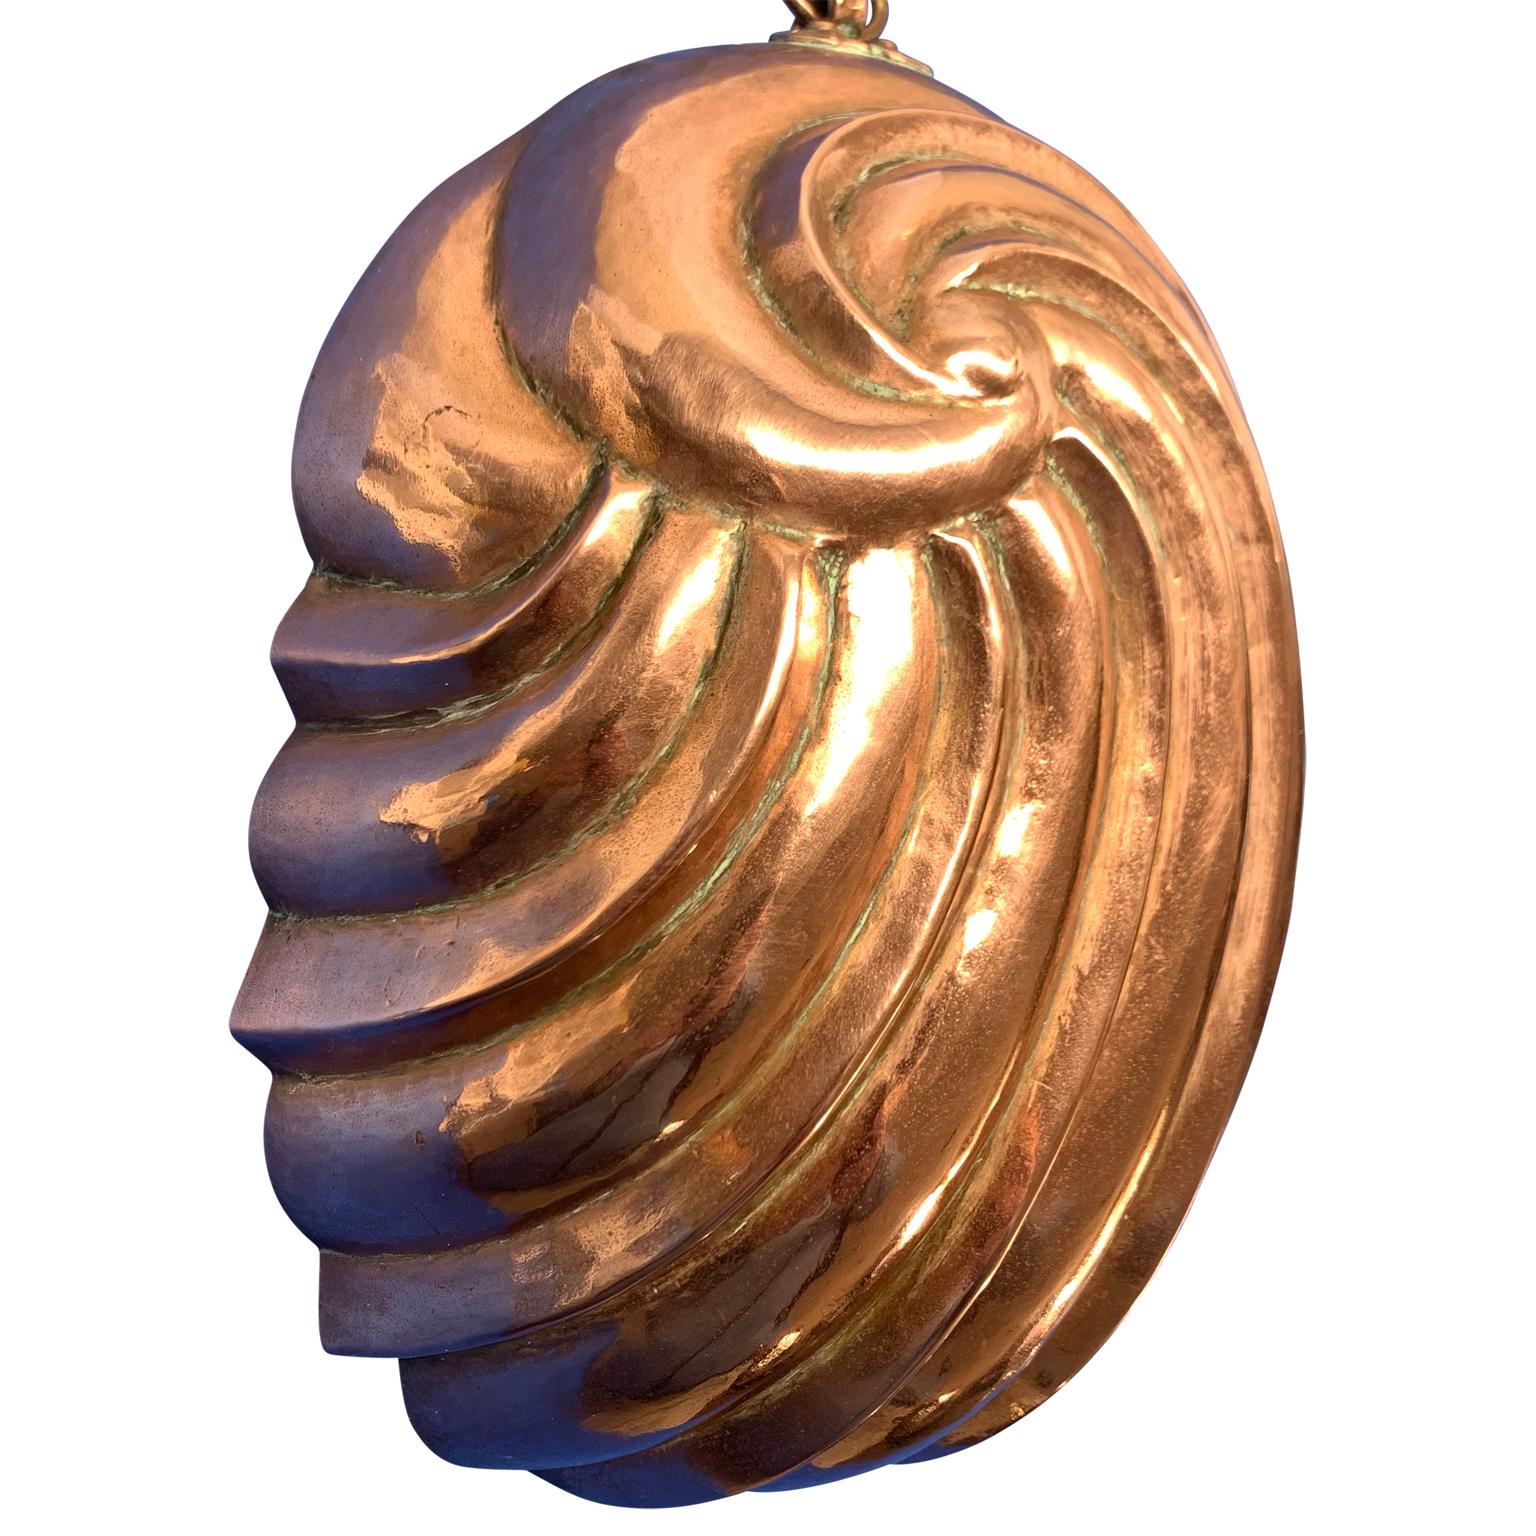 Danish early 19th century copper form or dish in the shape of a conch.